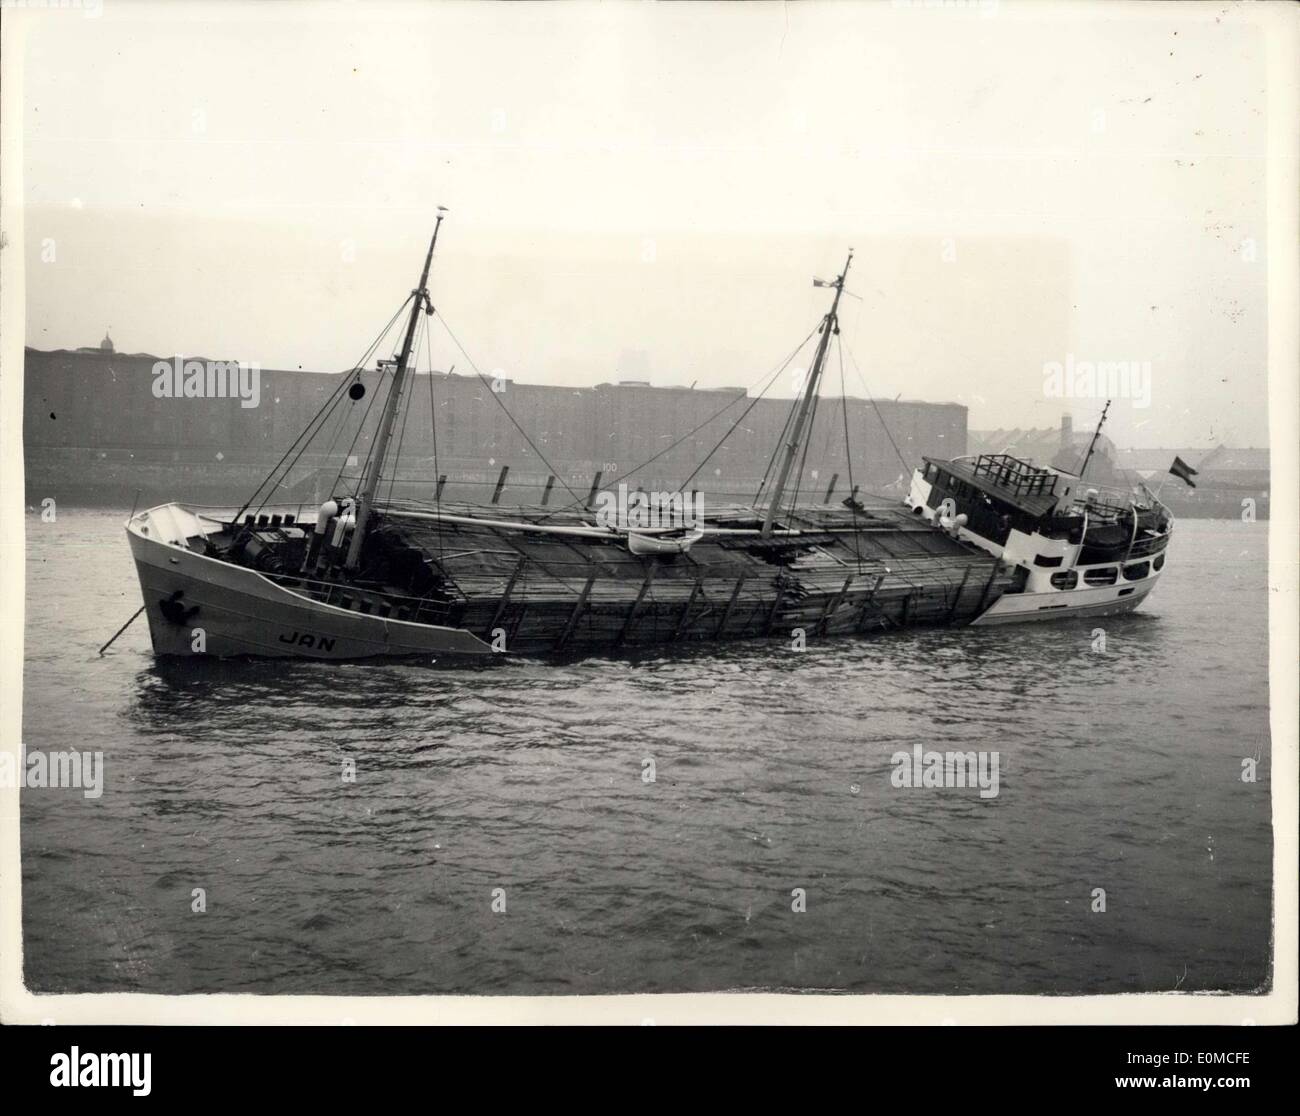 Aug. 21, 1954 - Dutch Ship Arrives in the Mersey with a List of 30 Degrees: Battered by gales in a ten-day trip from Sweden, the Dutch motor vessel Jan arrived in the Mersey, Liverpool, yesterday, with a list of more than 30 degrees.The list was caused by her deck cargo of timber being swollen by the heavy rain which came with the gale.This ship carries a crew of 11 - including the young wife of the Captain L.Bergsma, who has travelled thousands of miles with him on his voyages. Photo Shows Photographed from the river, the Jan lists to port with part of her cargo of timber awash. Stock Photo